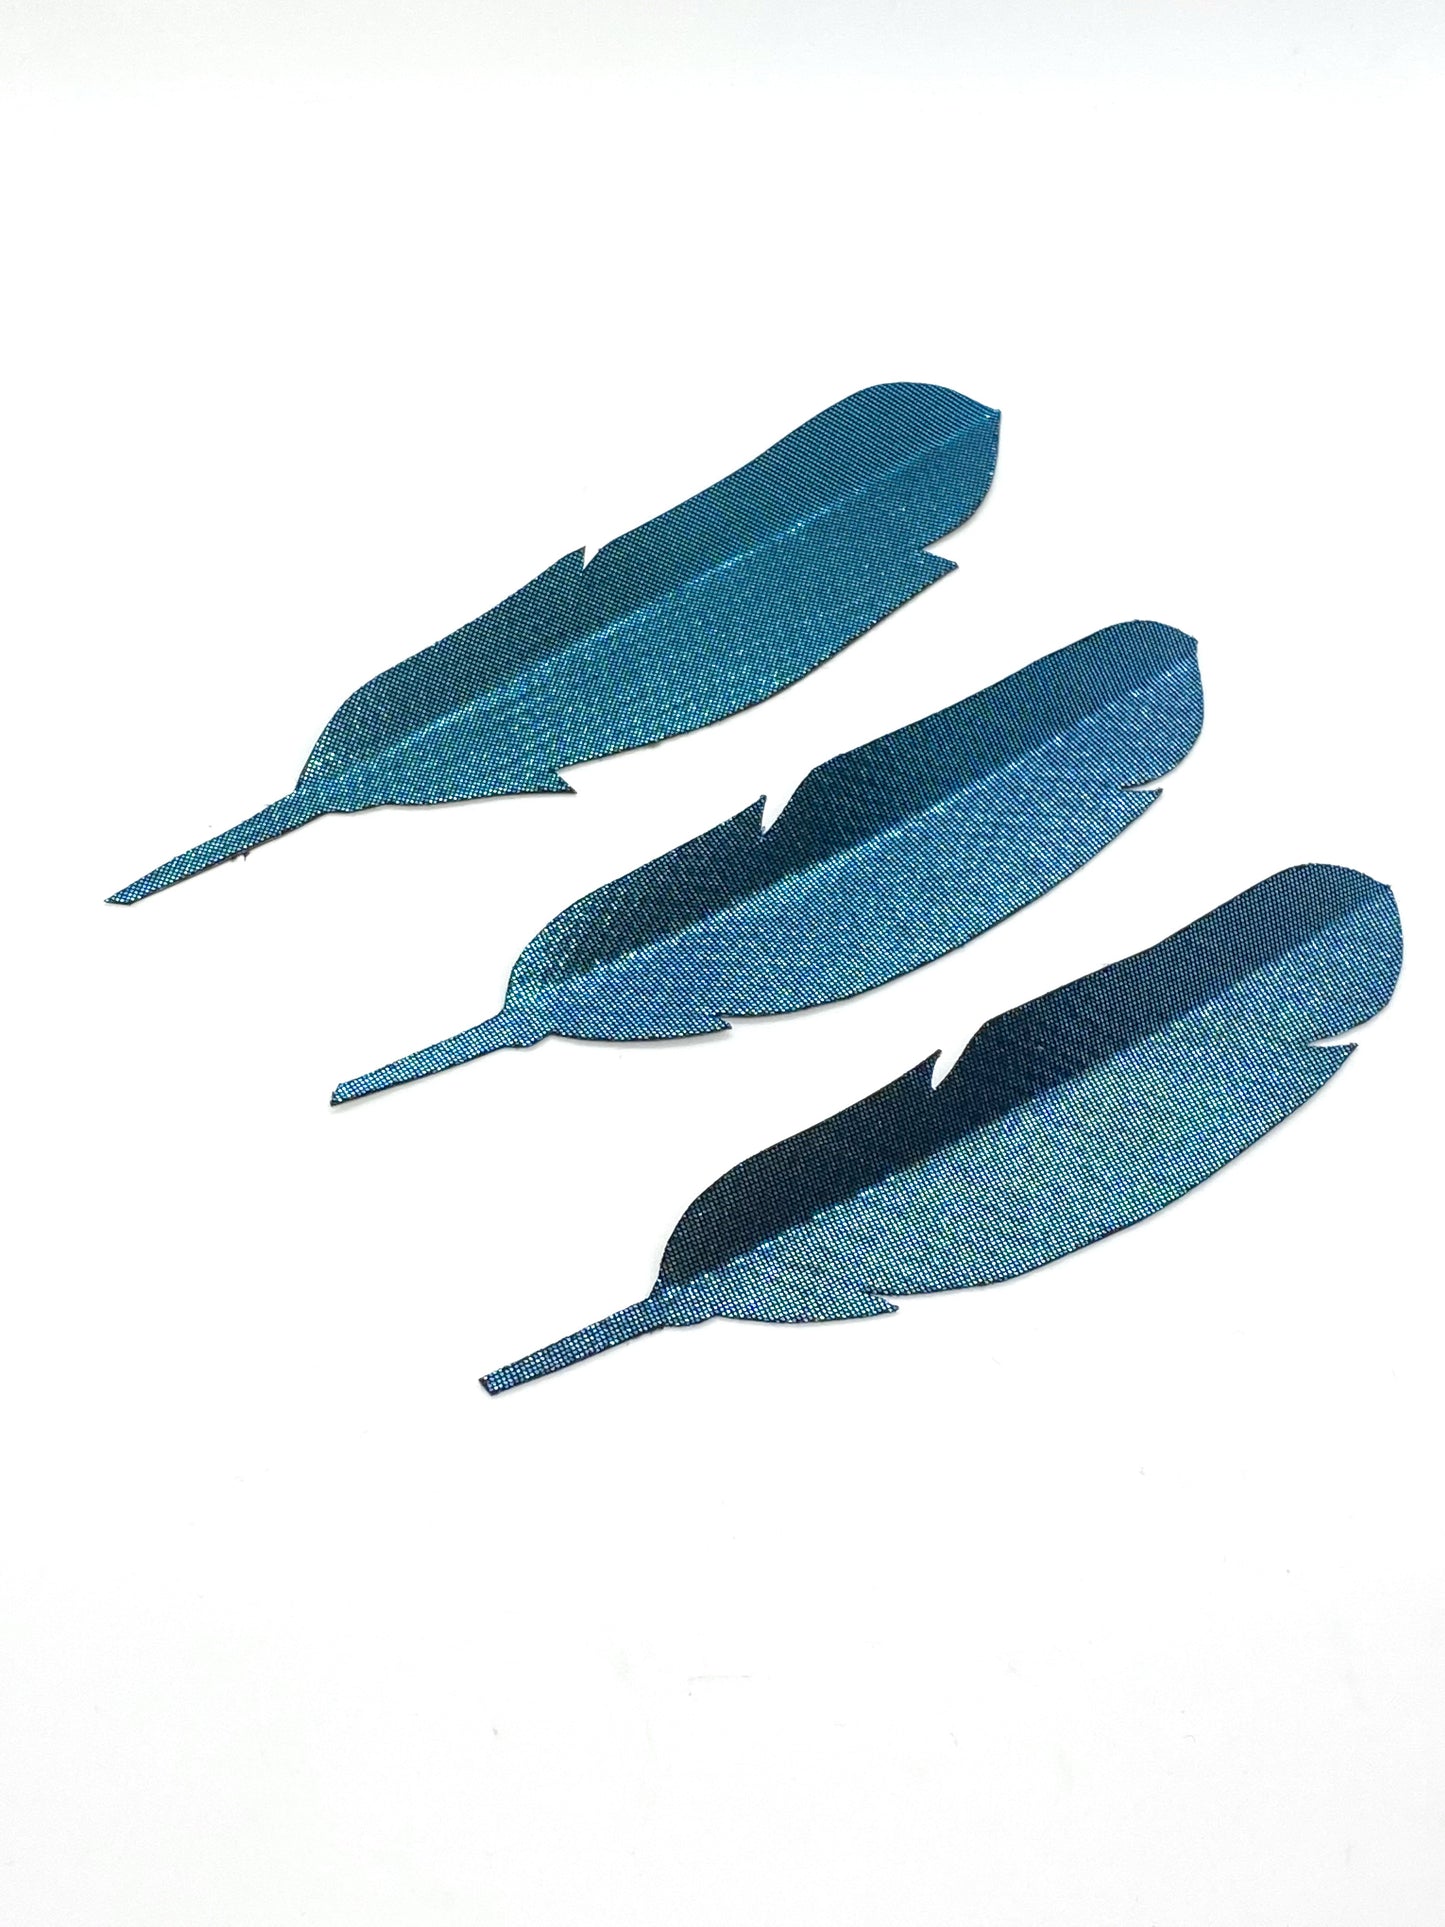 Single Feather Magnet - Peacock Blue